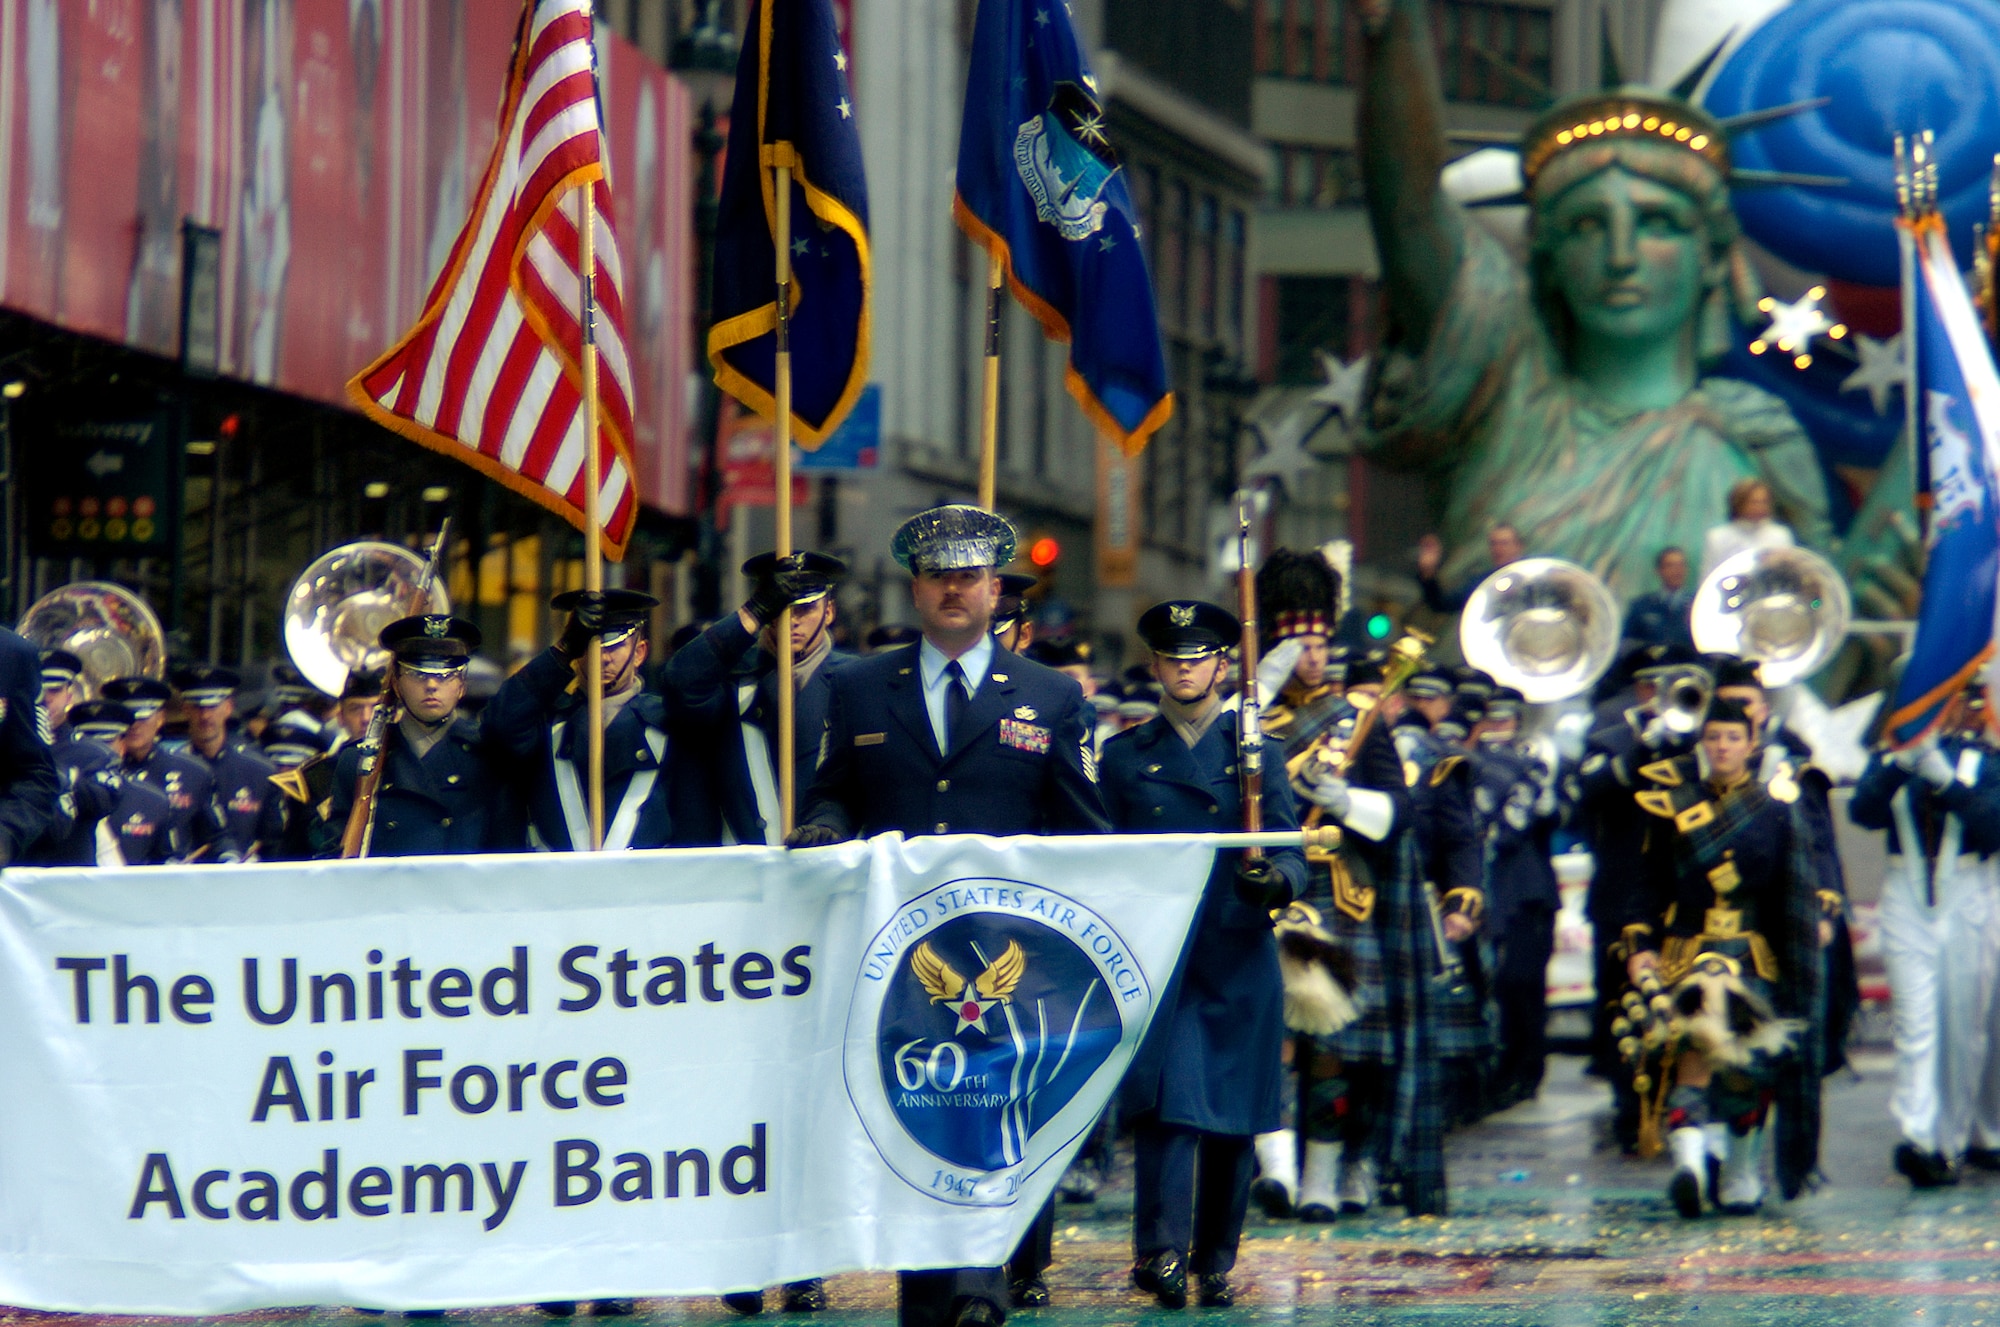 The U.S. Air Force Academy Marching Band marches down Broadway at the 80th Macy's Thanksgiving Day Parade in New York City, N.Y., Nov. 23. (U.S. Air Force photo/Senior Airman Brian Ferguson)
